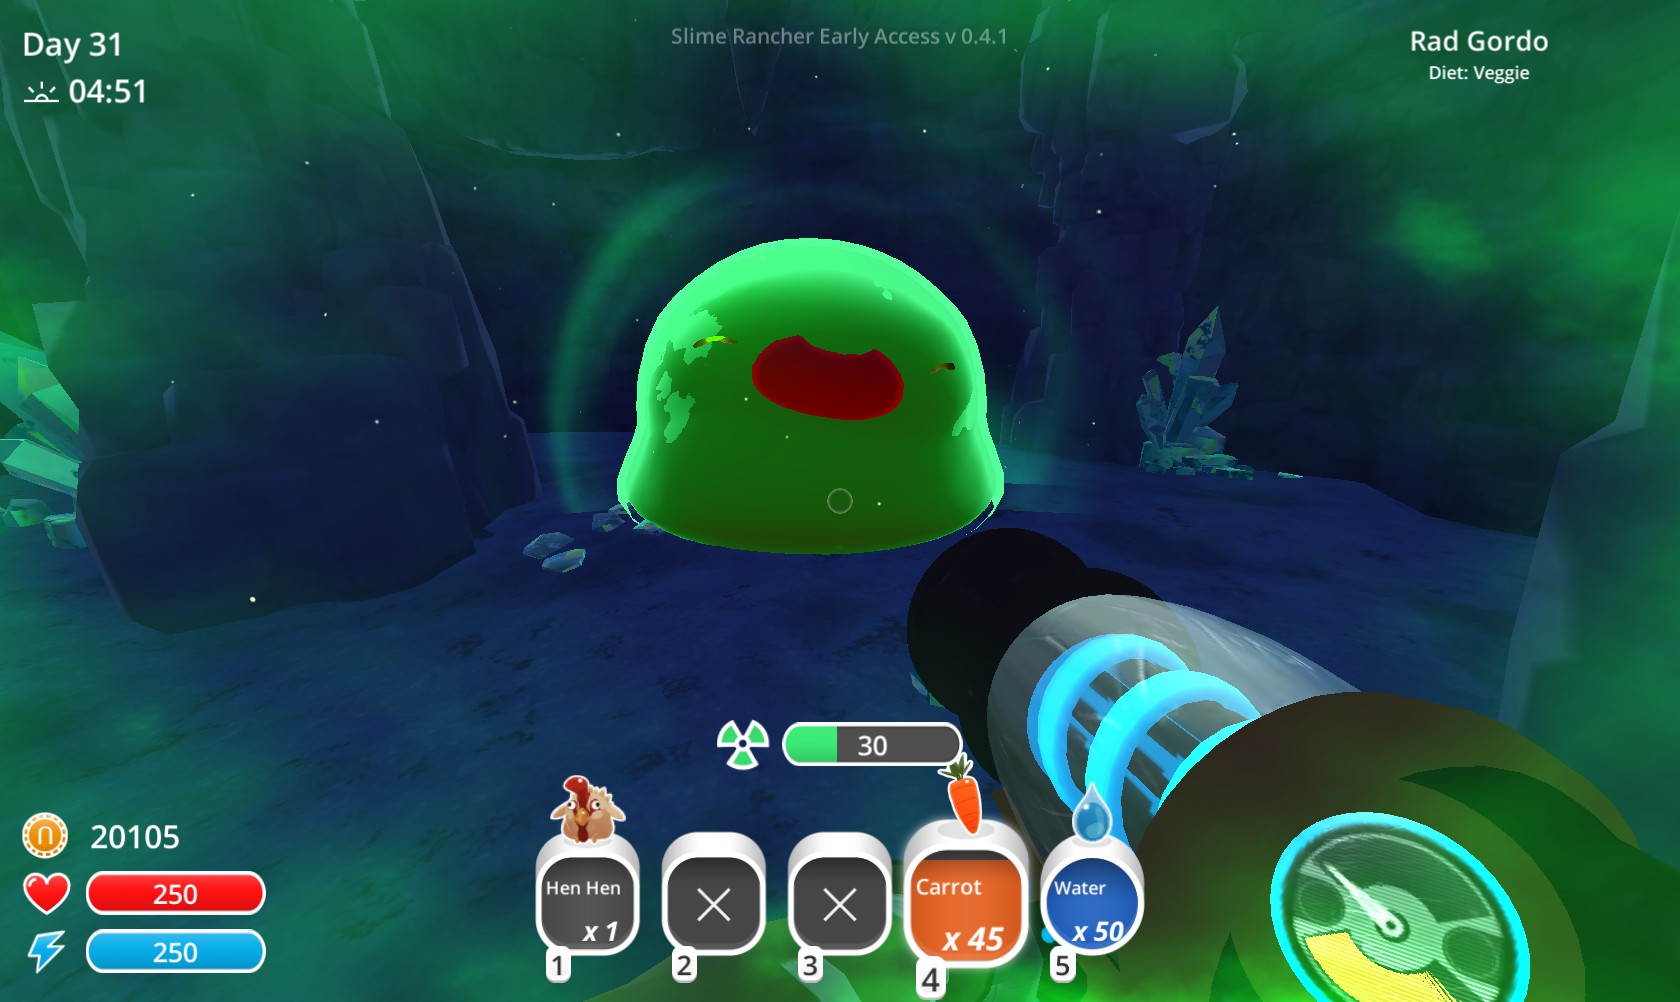 Slime Rancher 2 updates will have “amazing things,” devs say